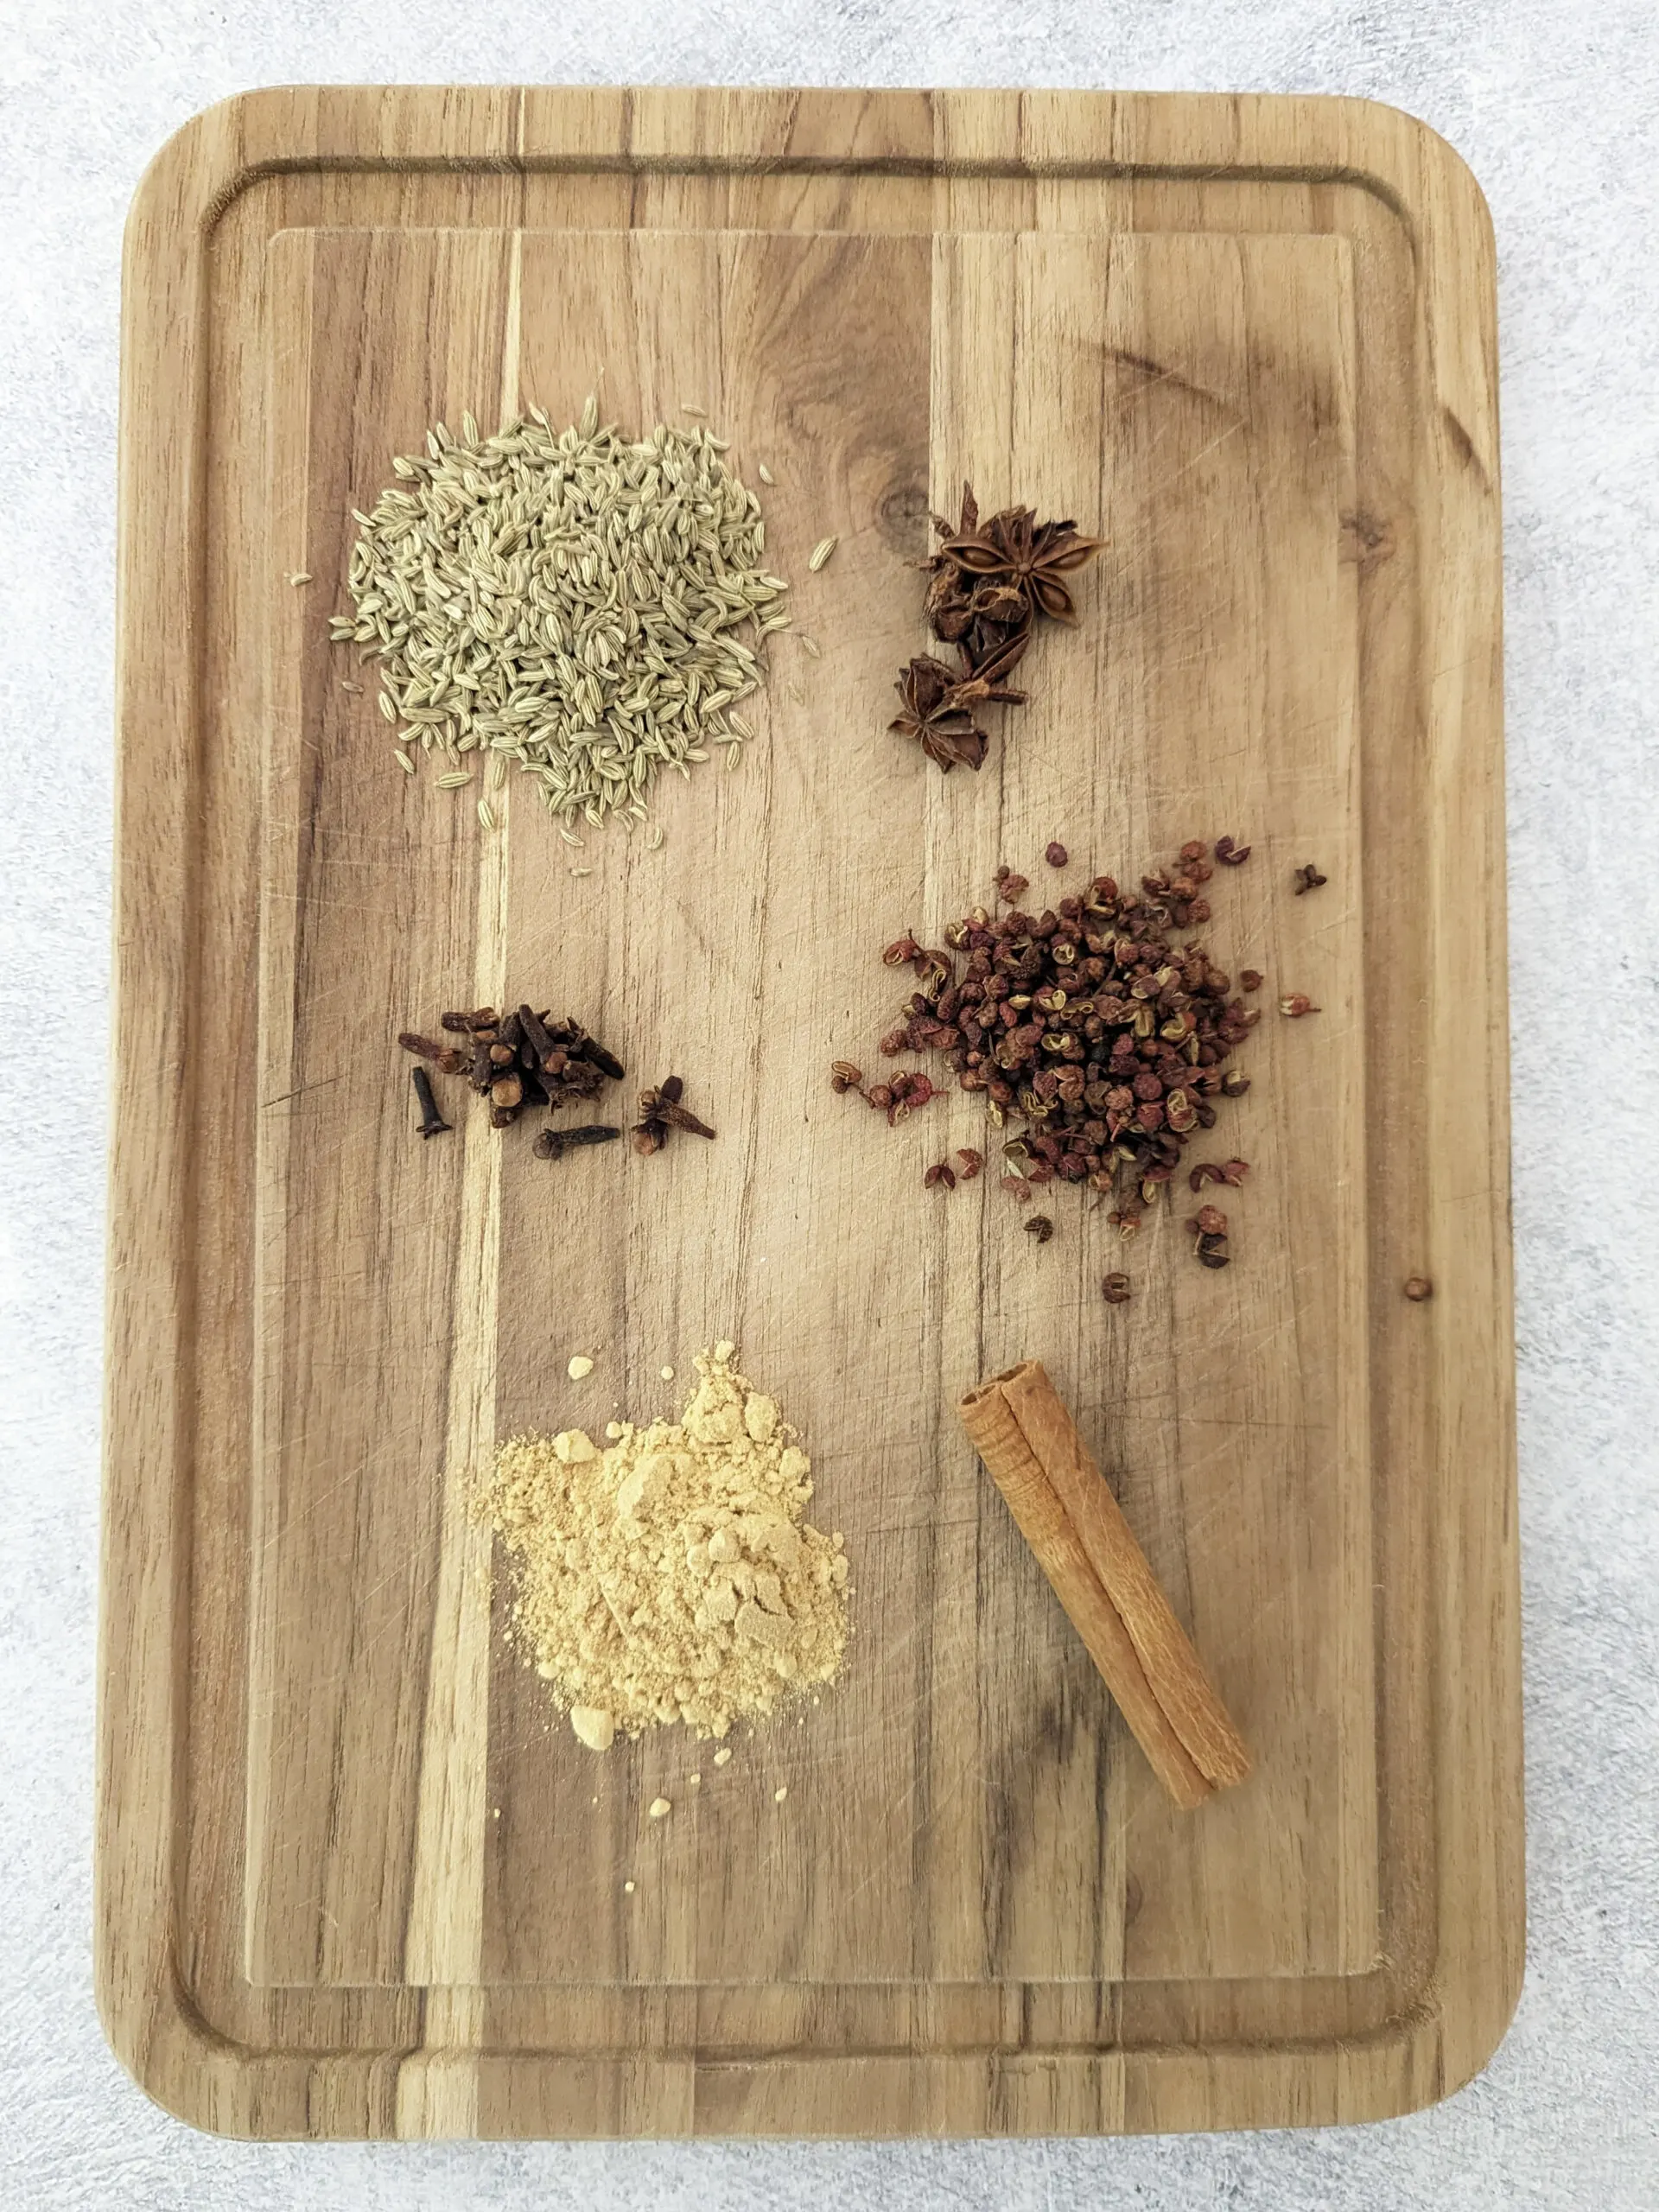 The ingredients for our Chinese 5 spice substitute.